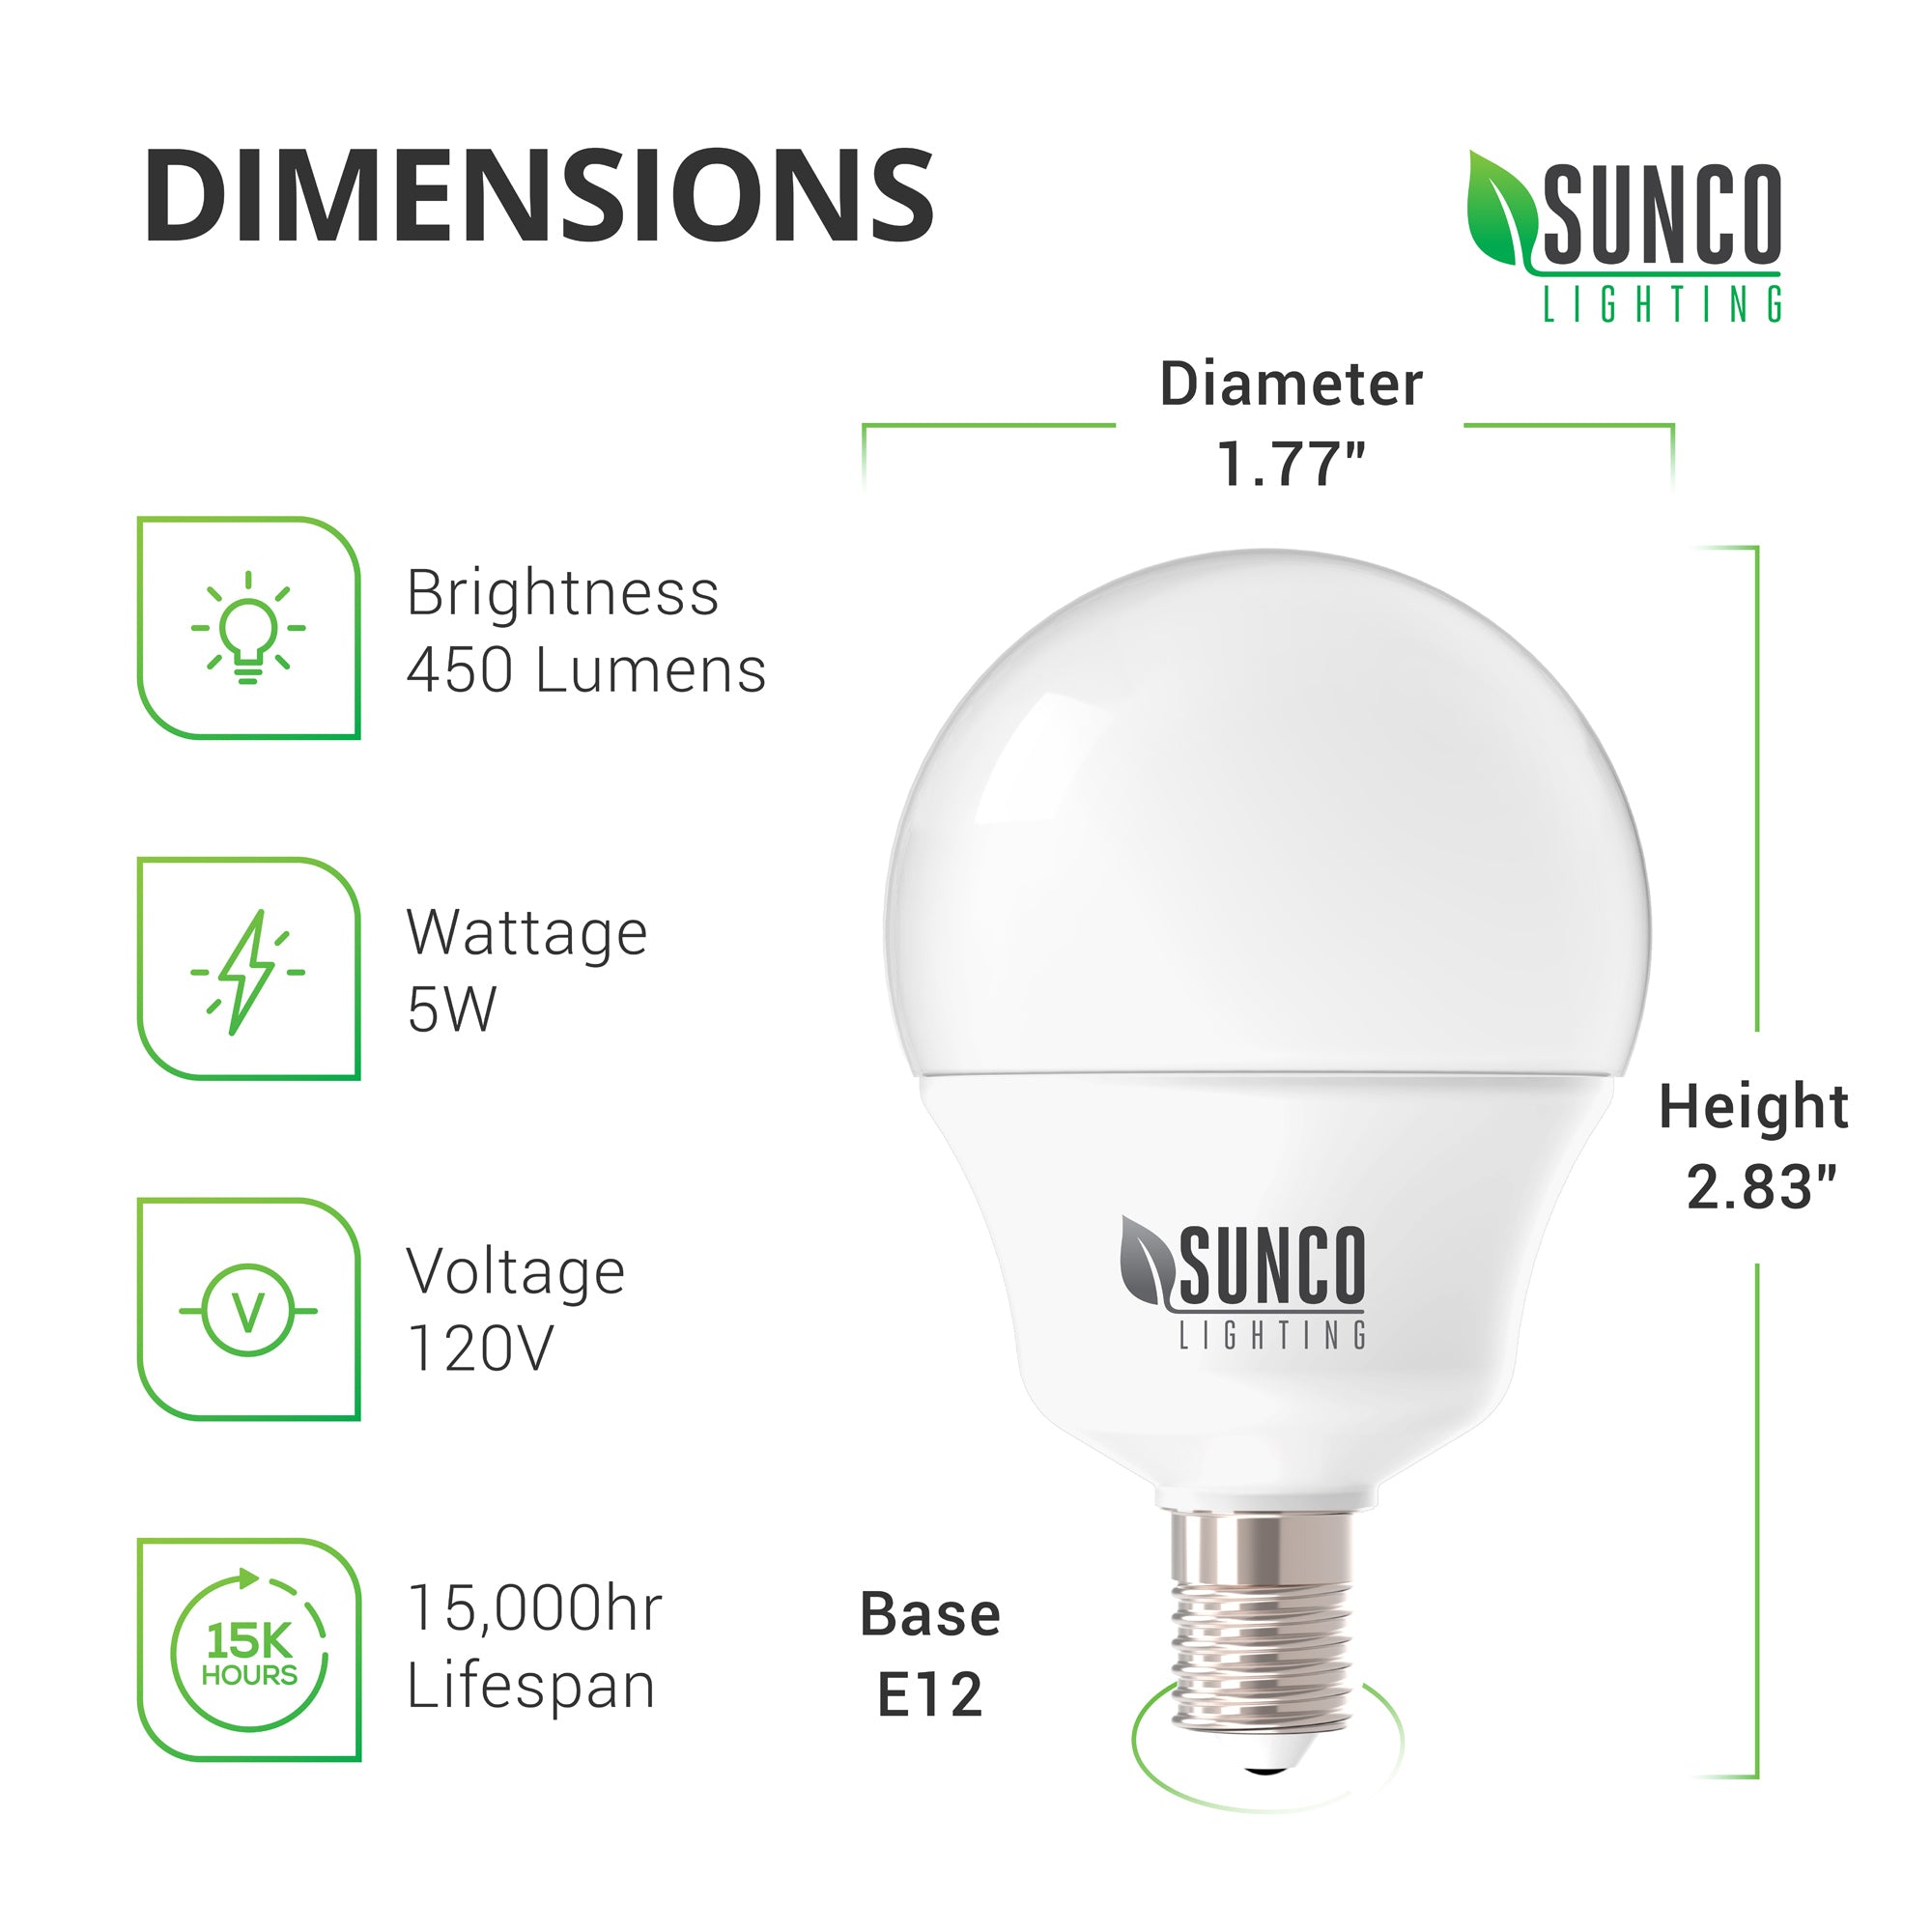 Dimensions of the 5W G14 LED Bulb include diameter: 1.77 inches, height: 2.83 inches, and an E12 base. More technical specs Brightness: 450 lumens, Wattage: 5W, Voltage: 120V. This is a non-dimmable bulb with a long lifespan of 15,000 hours. The damp rate globe light is best suited to indoor light fixtures.